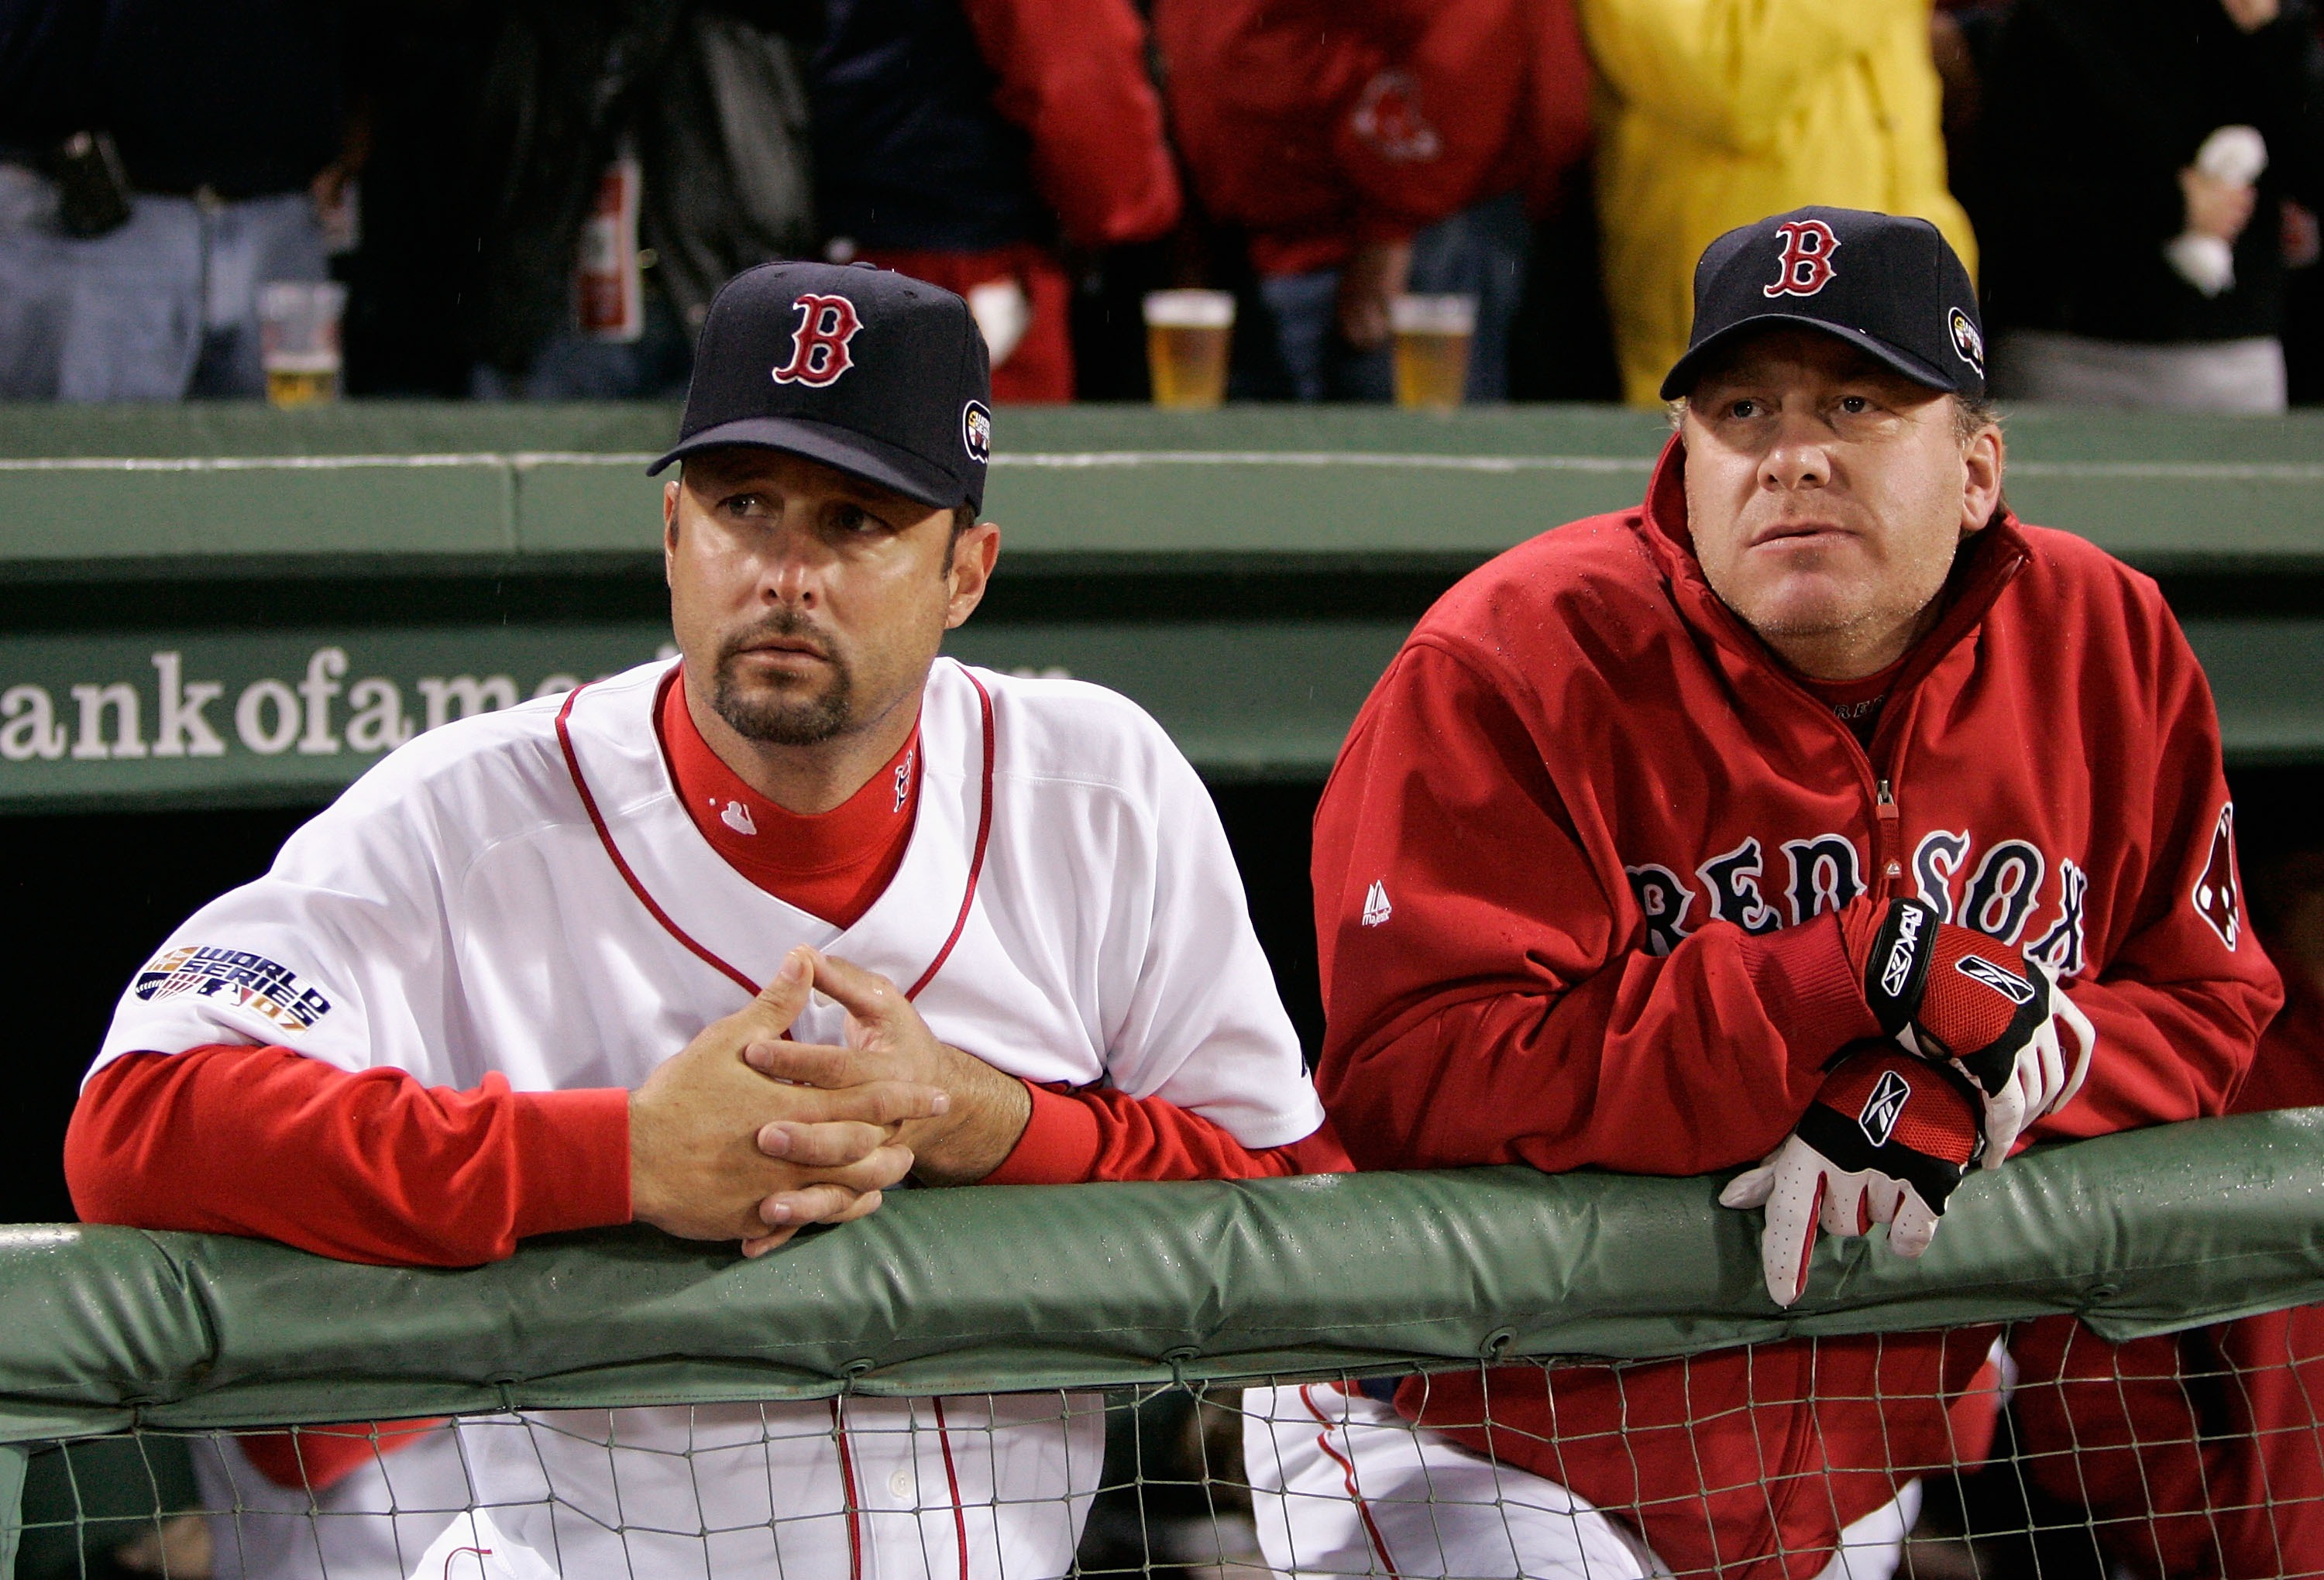 Pitchers Tim Wakefield, left, and Curt Schilling of the Boston Red Sox look on from the dugout.